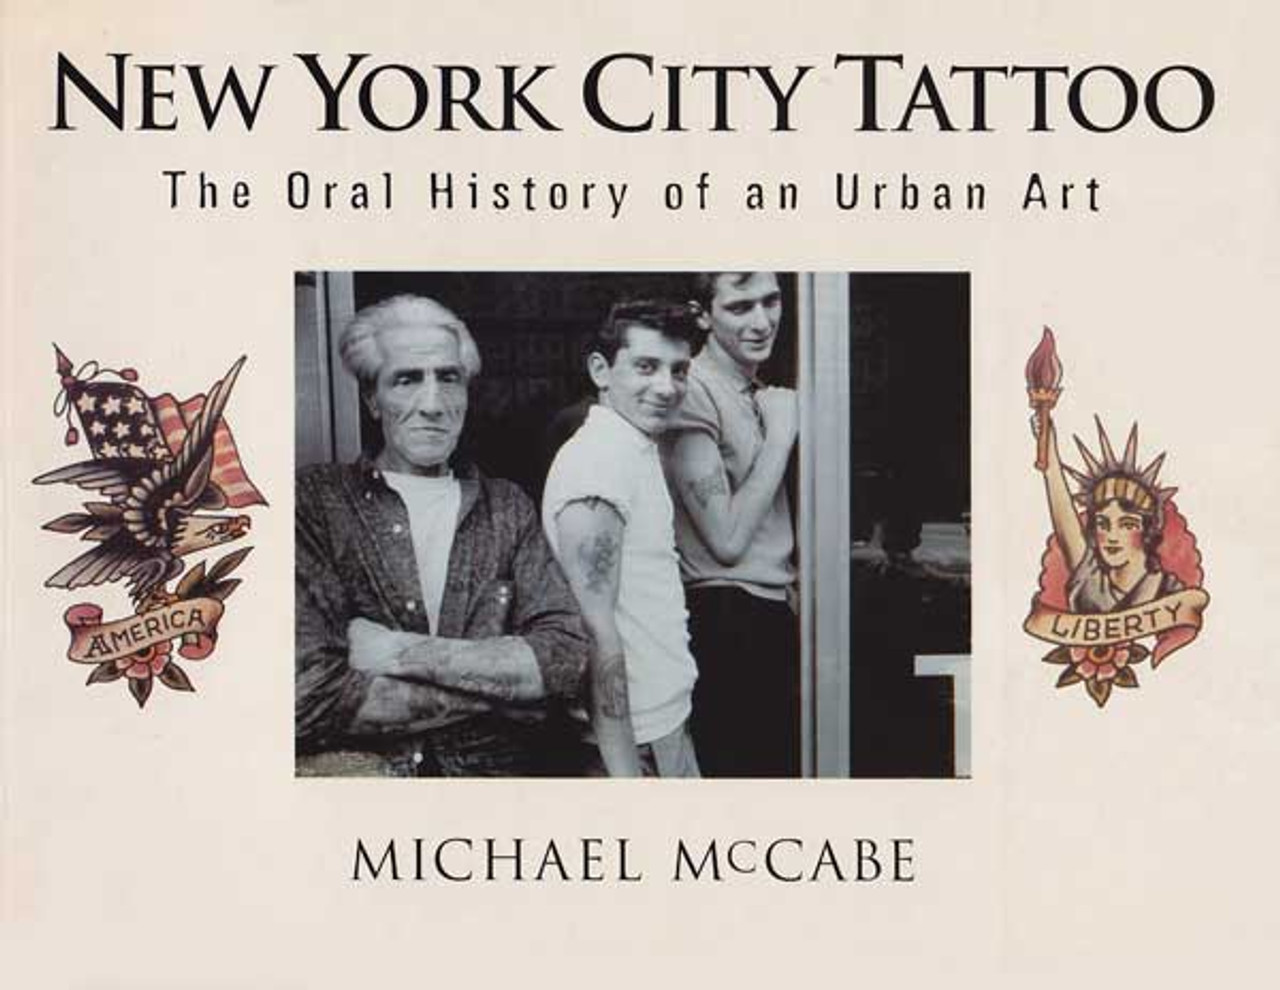 New York City Tattoo, The Oral History of an Urban Art